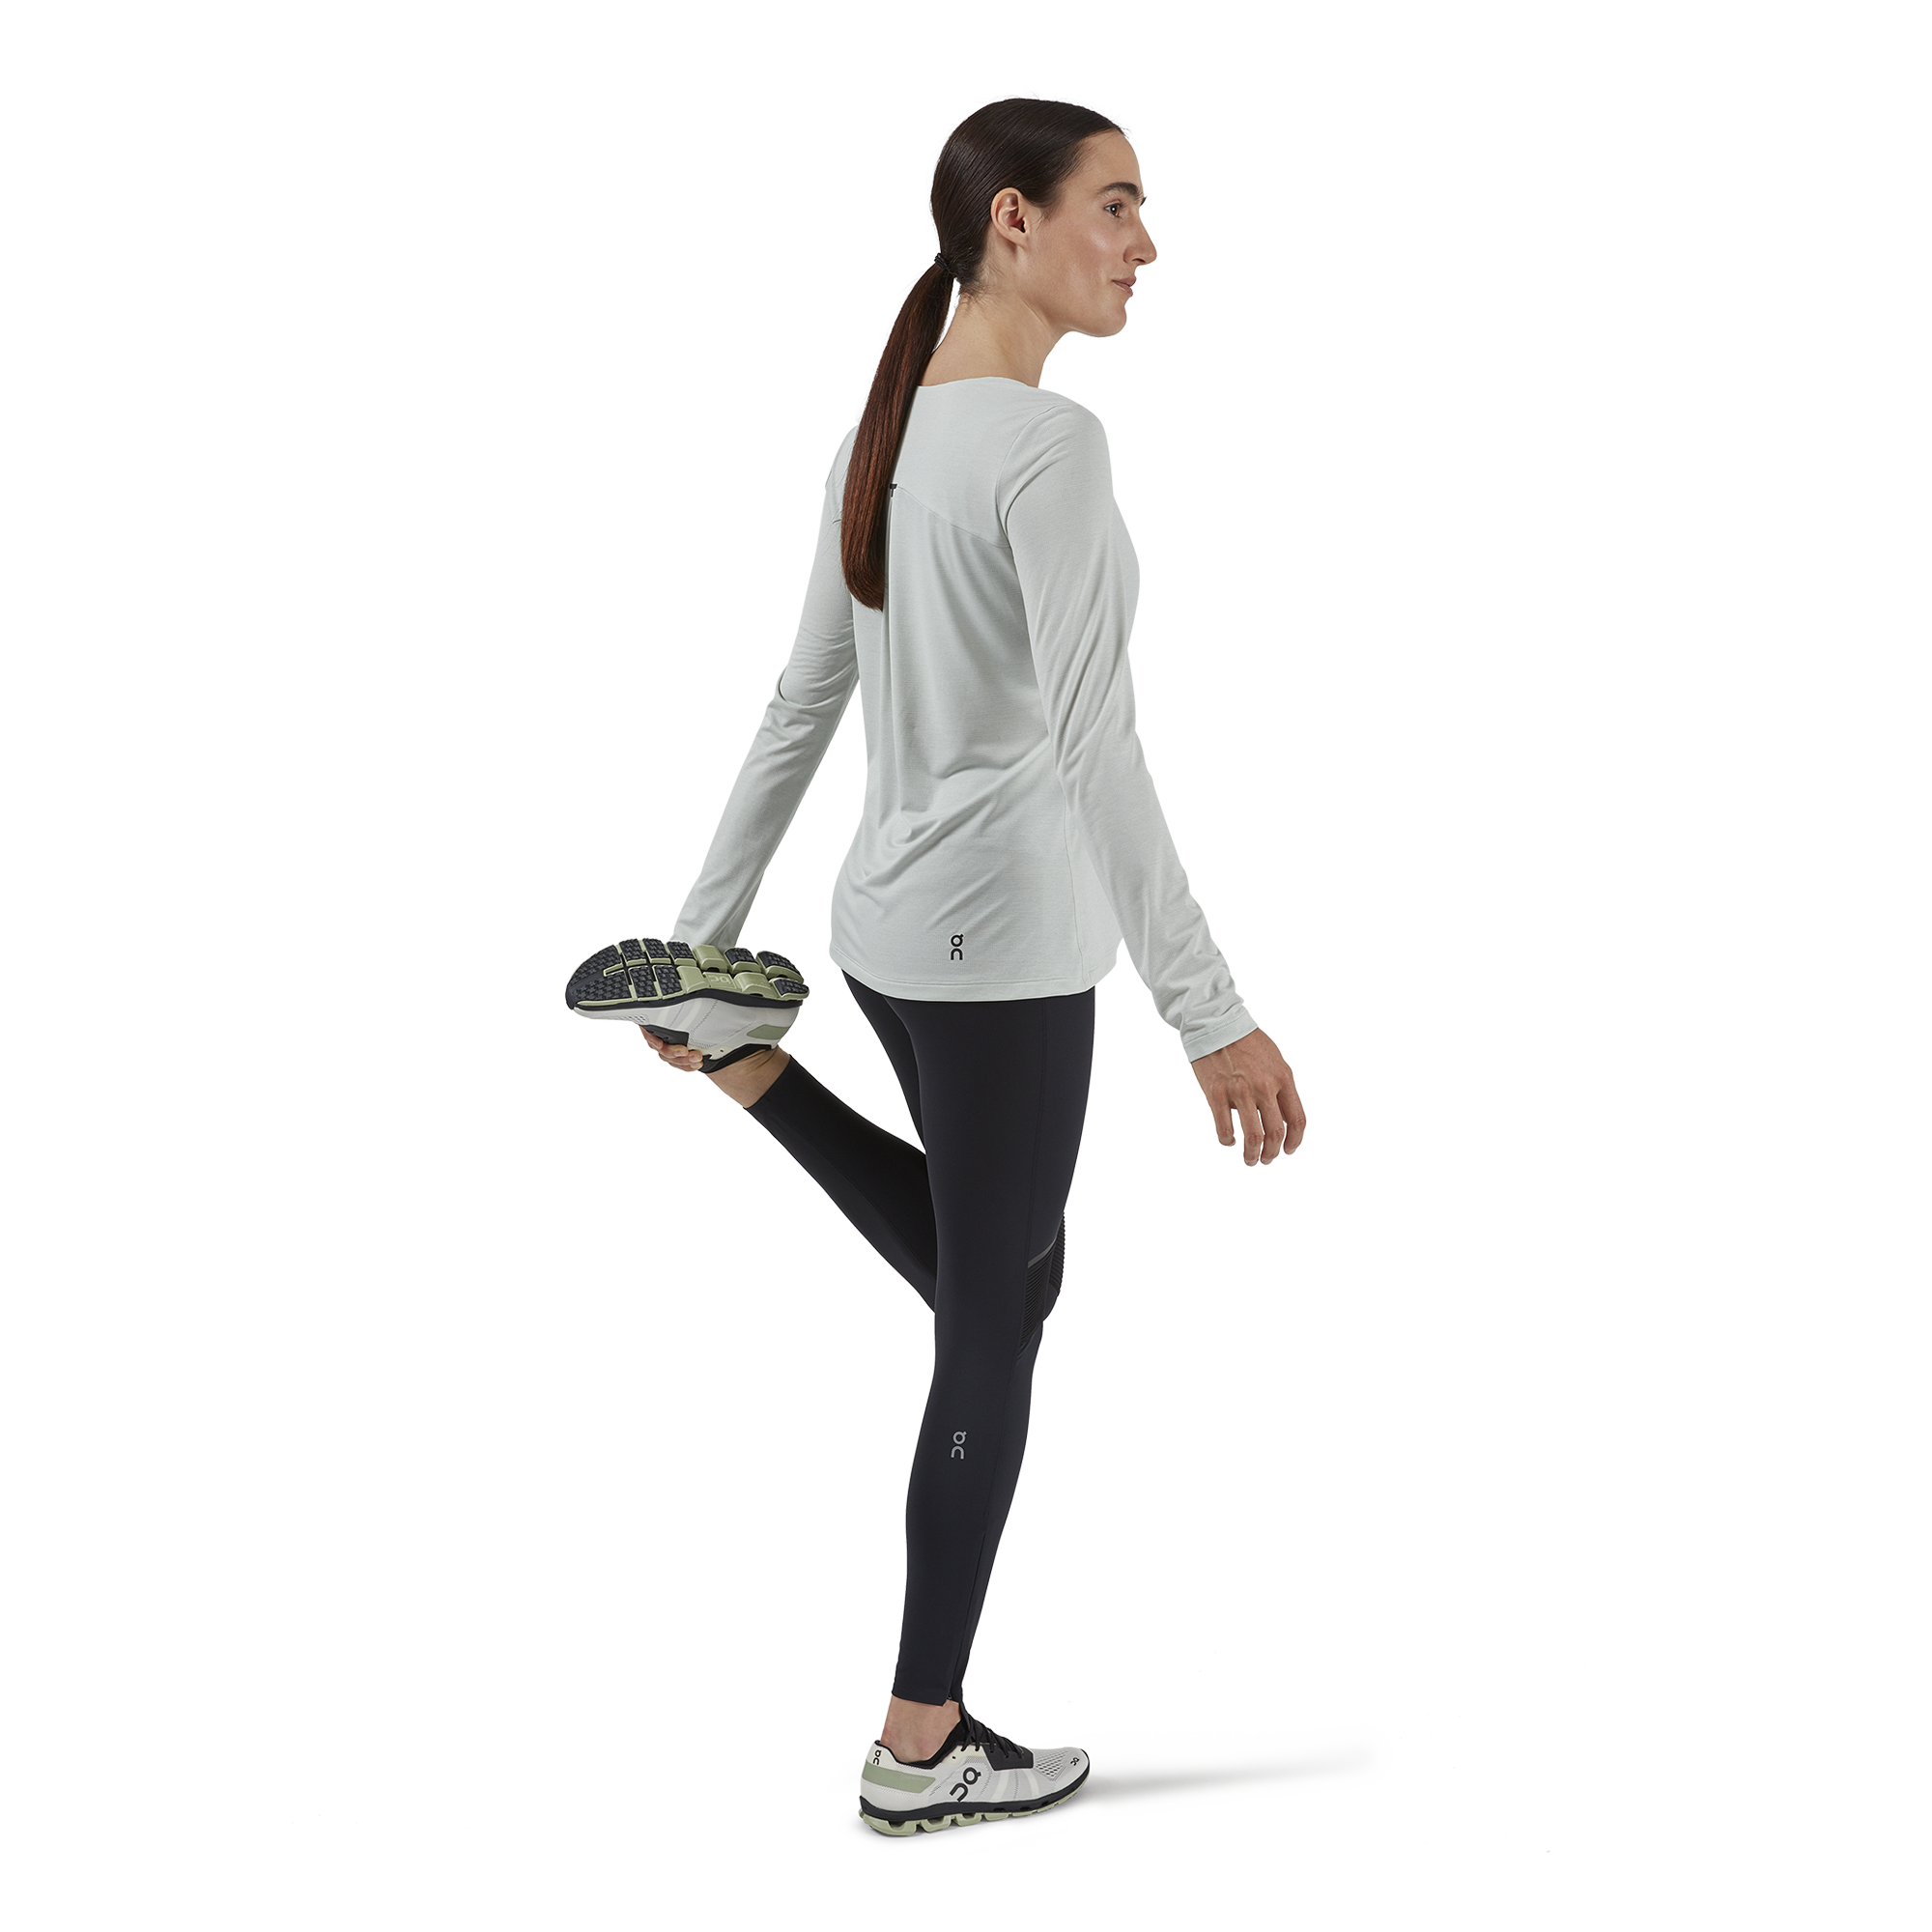 Women's Microfiber Elastane Stretch Performance Leggings with Broad  Waistband and Stay Dry Technology - Poseidon